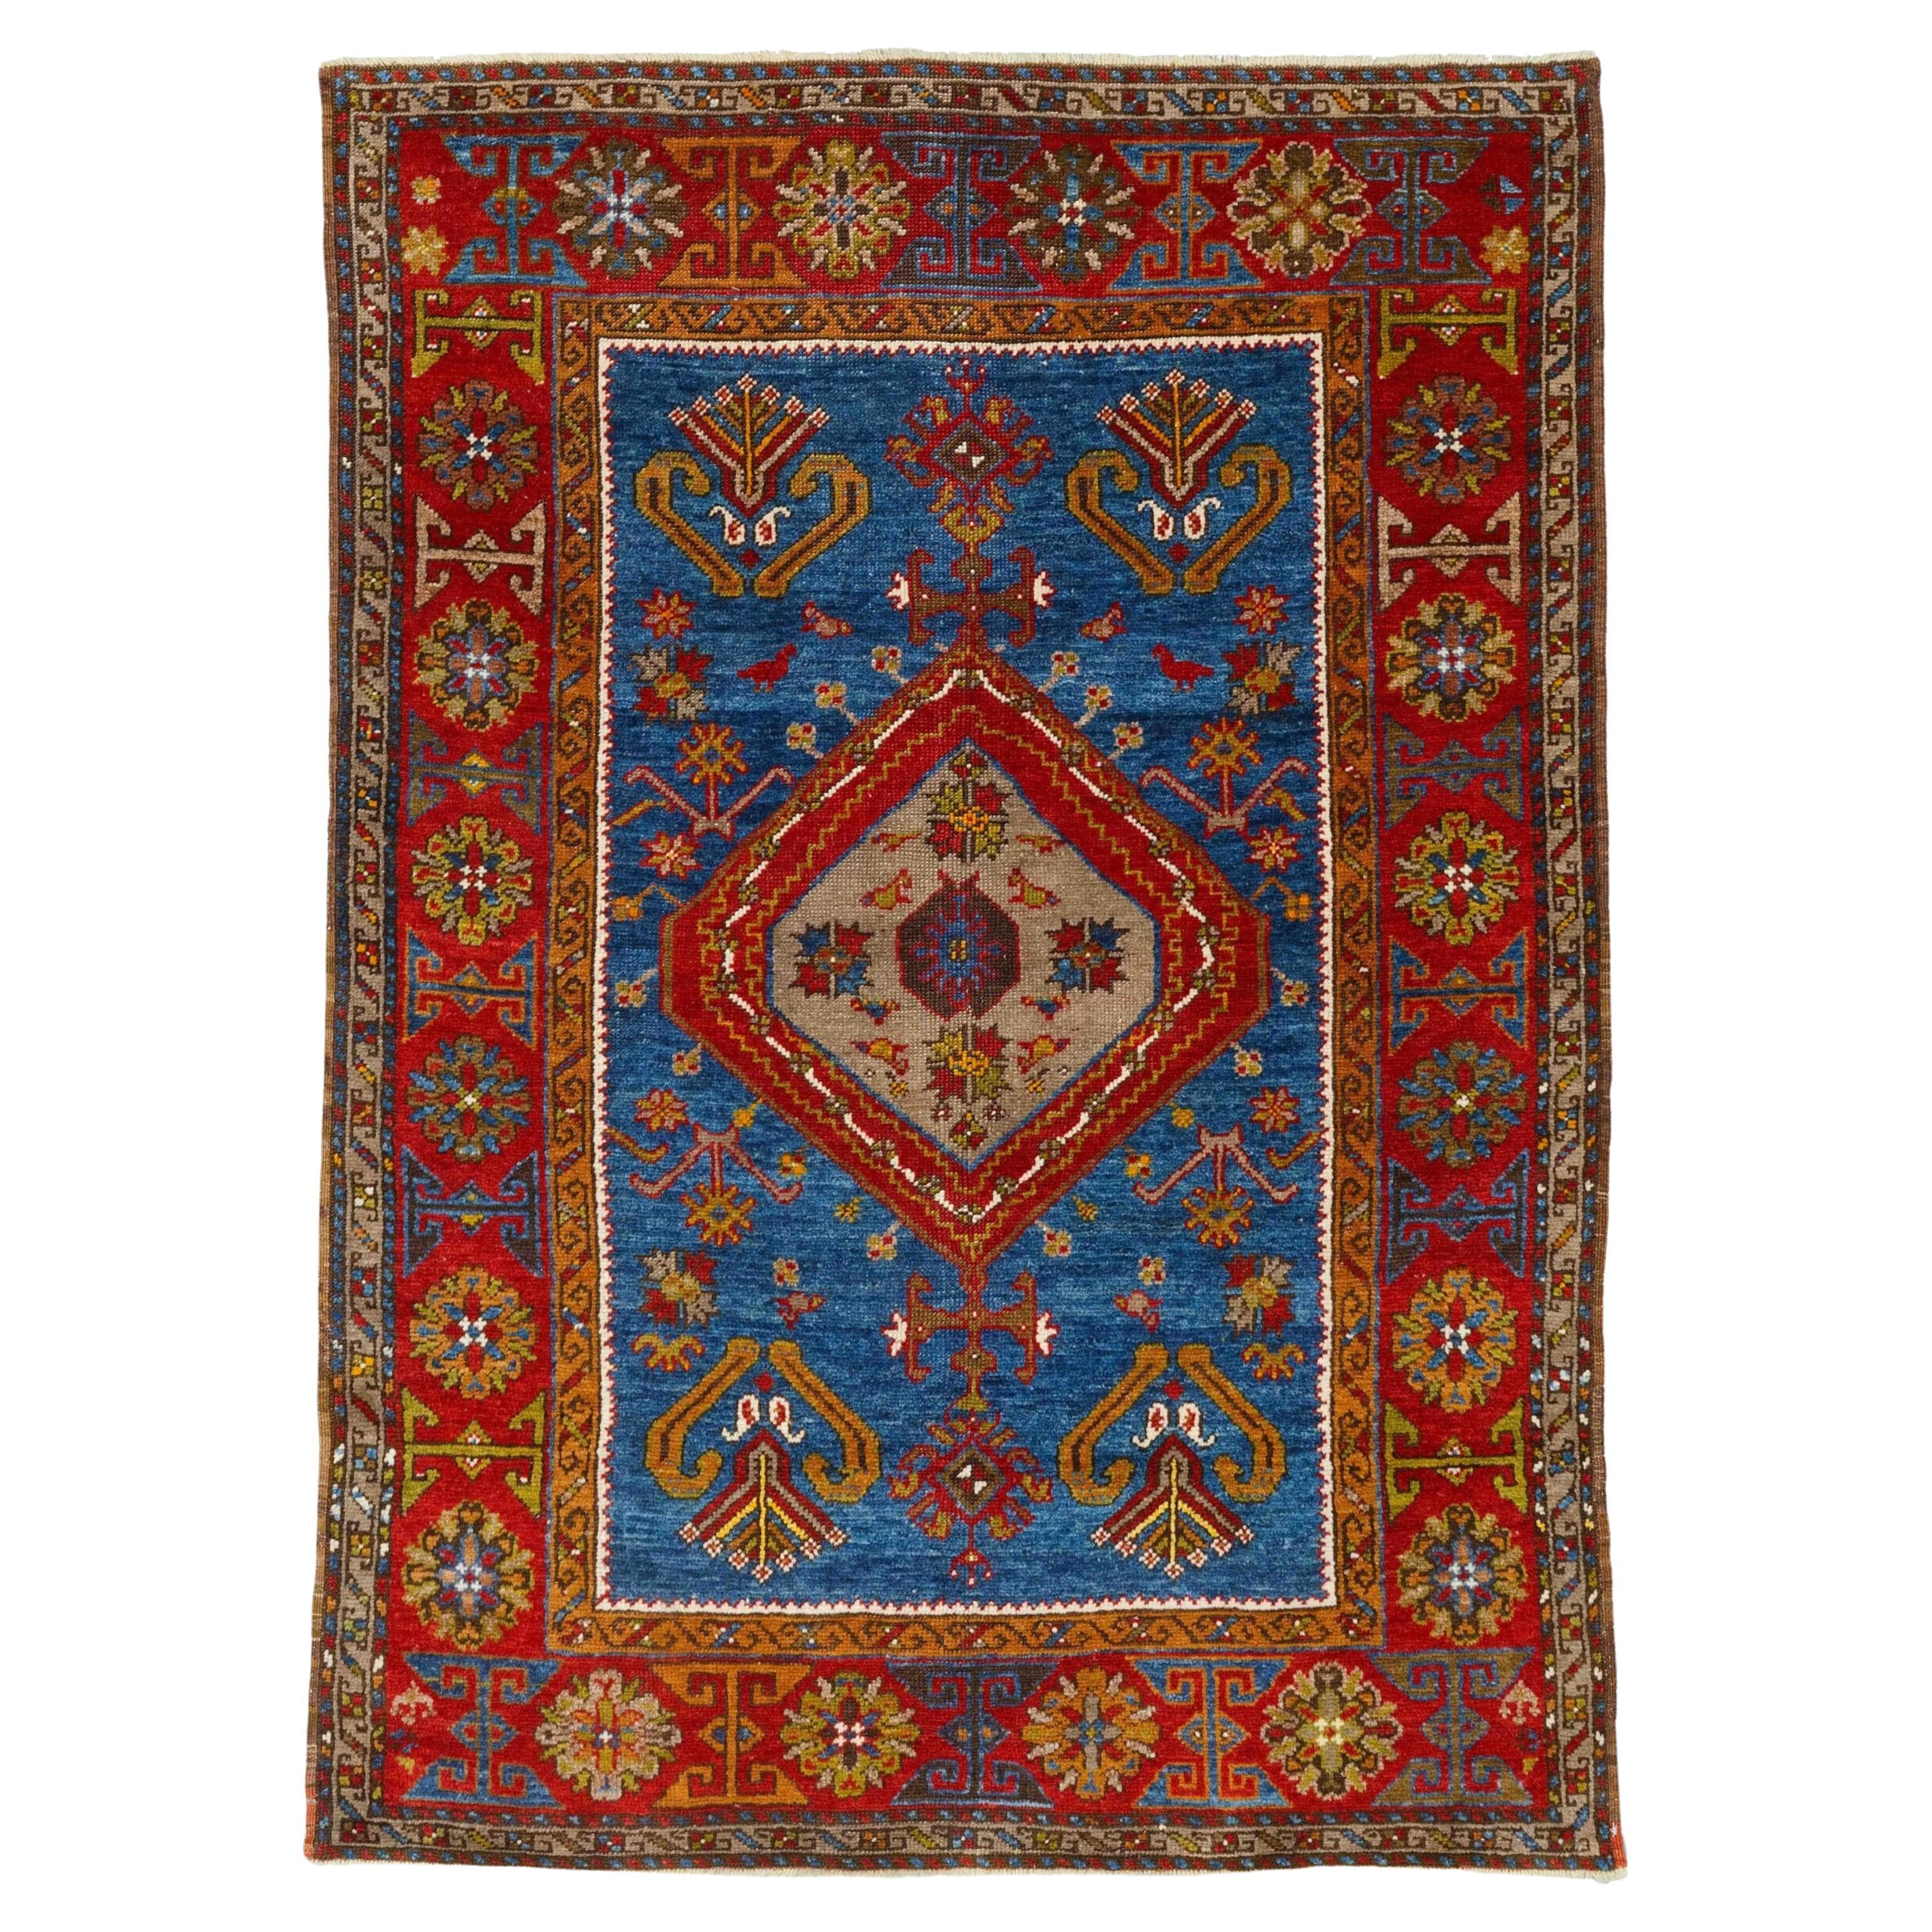 Antique Yahyali Rug - Late of 19th Century Central Anatolian Yahyali Rug For Sale